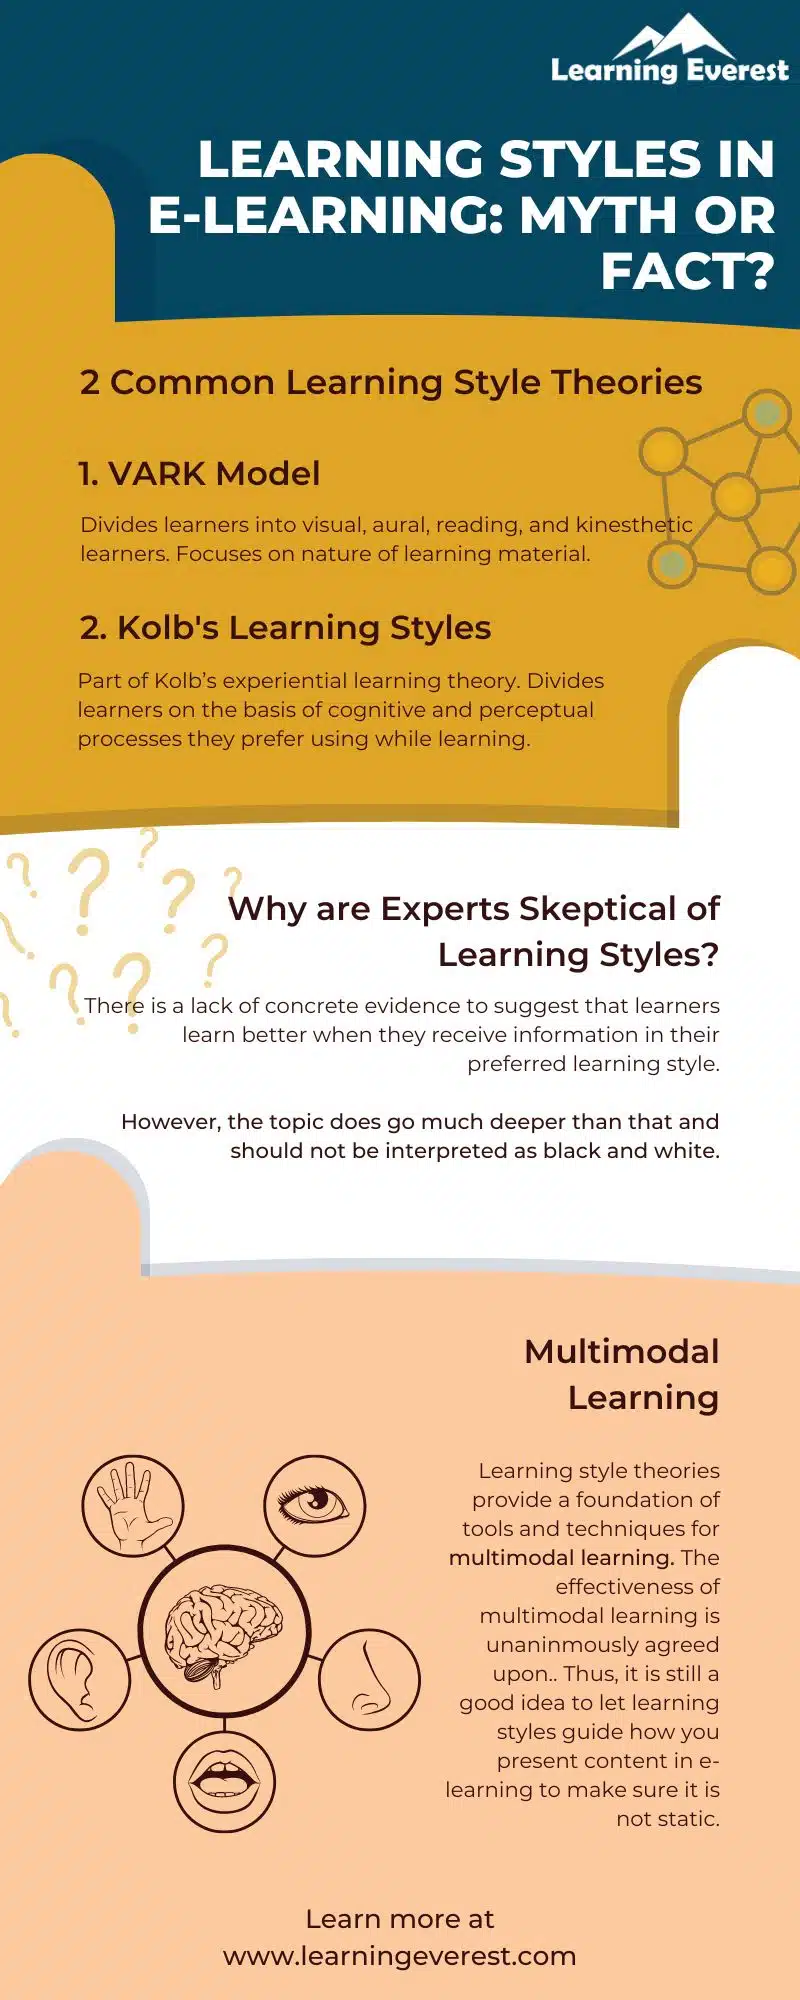 Learning Styles in E-Learning Myth or Fact 